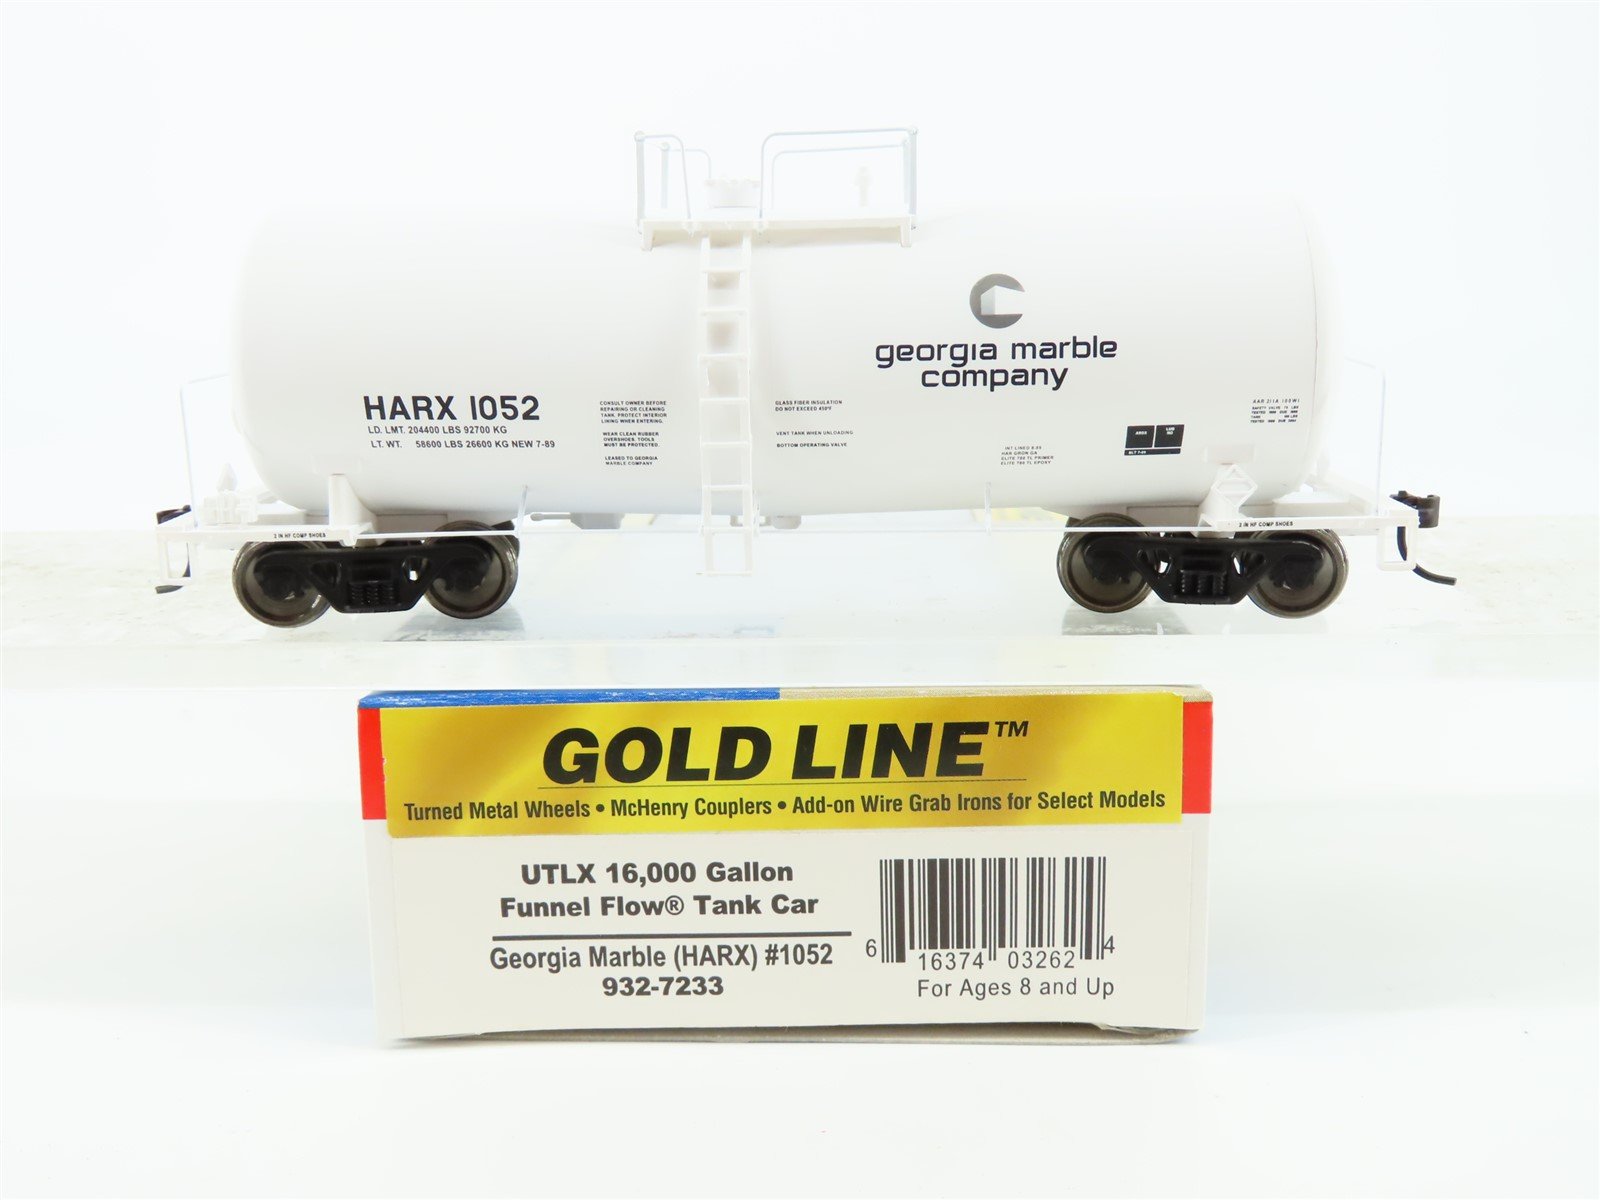 HO Walthers Gold Line 932-7233 HARX Georgia Marble Funnel Flow Tank Car #1052